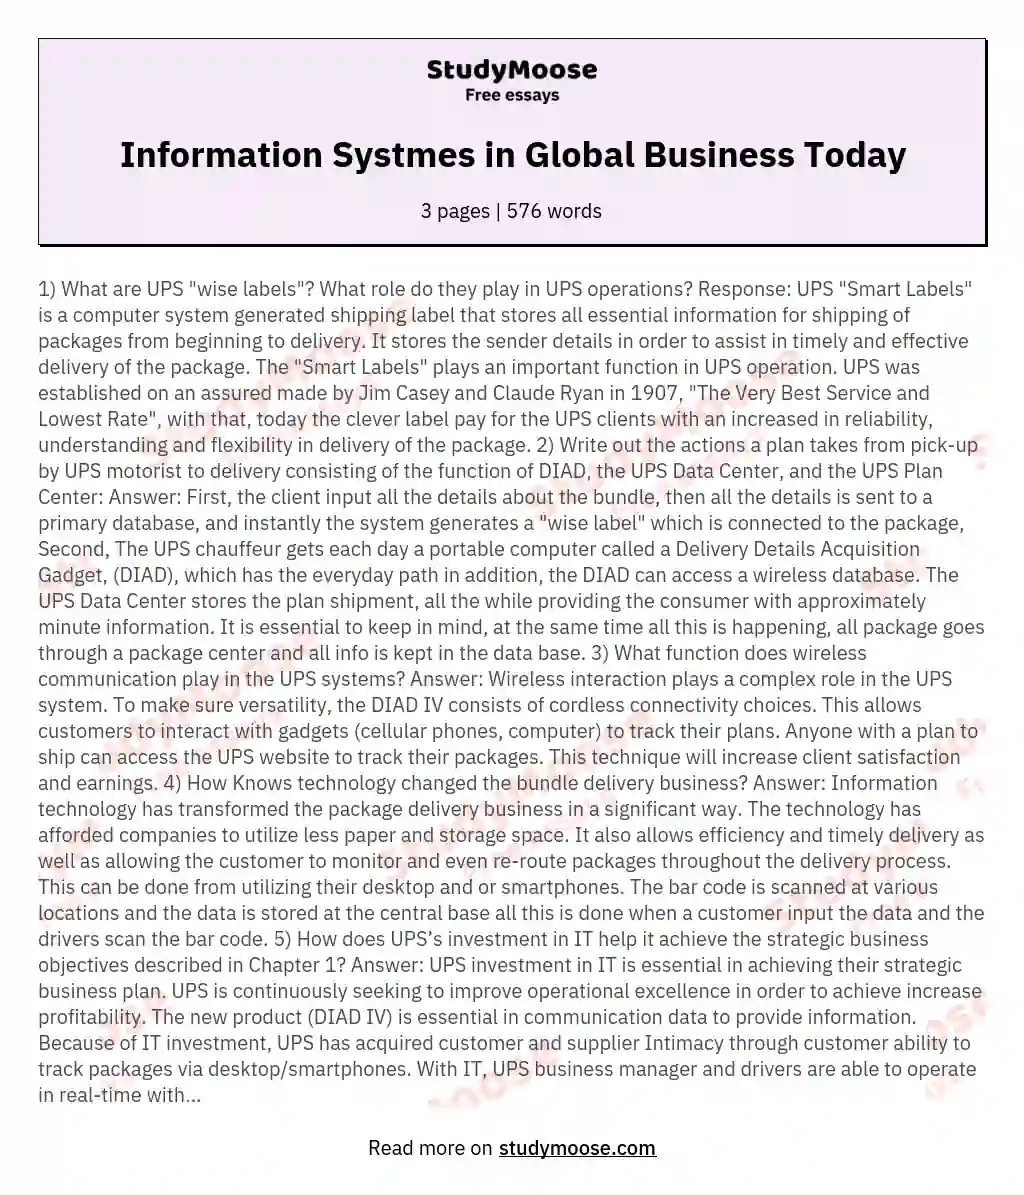 Information Systmes in Global Business Today essay